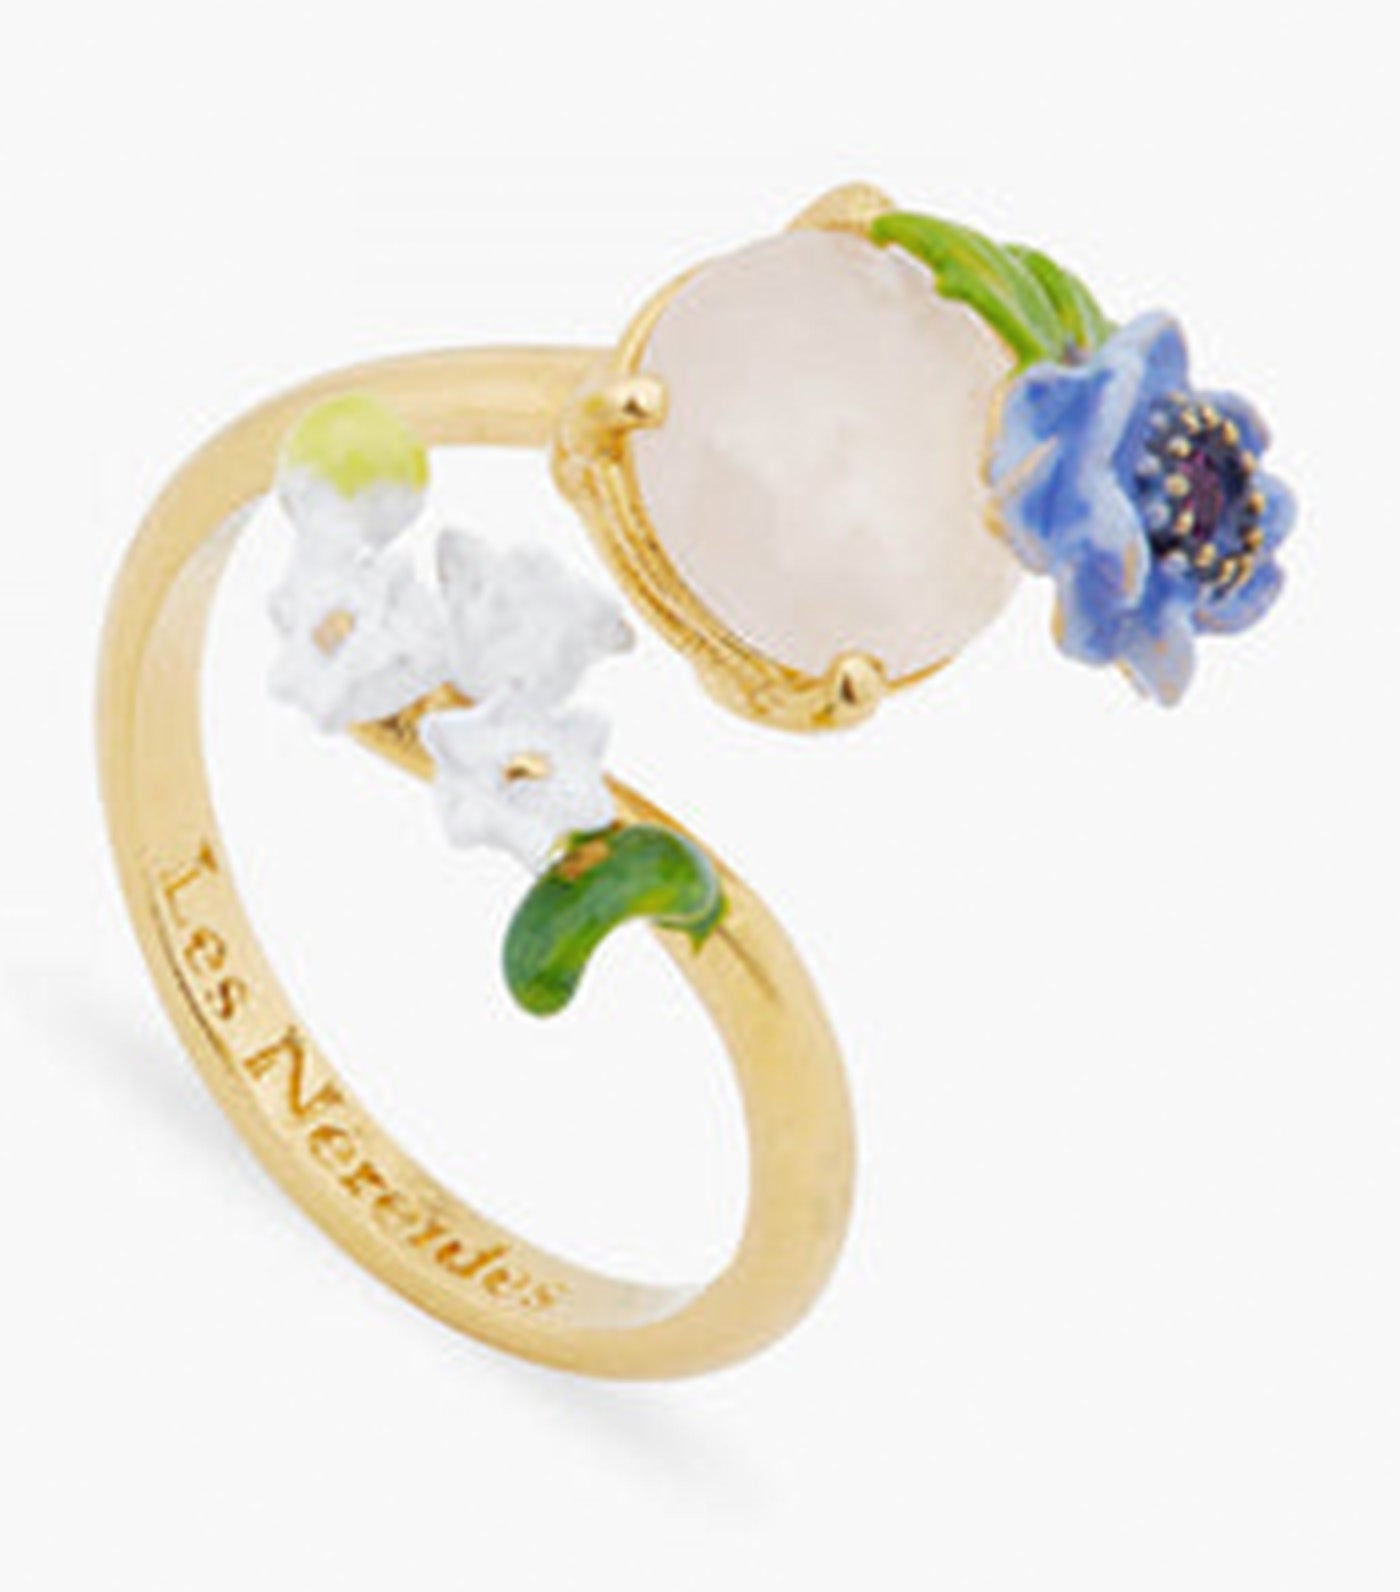 Rose Quarts and Floral Ring